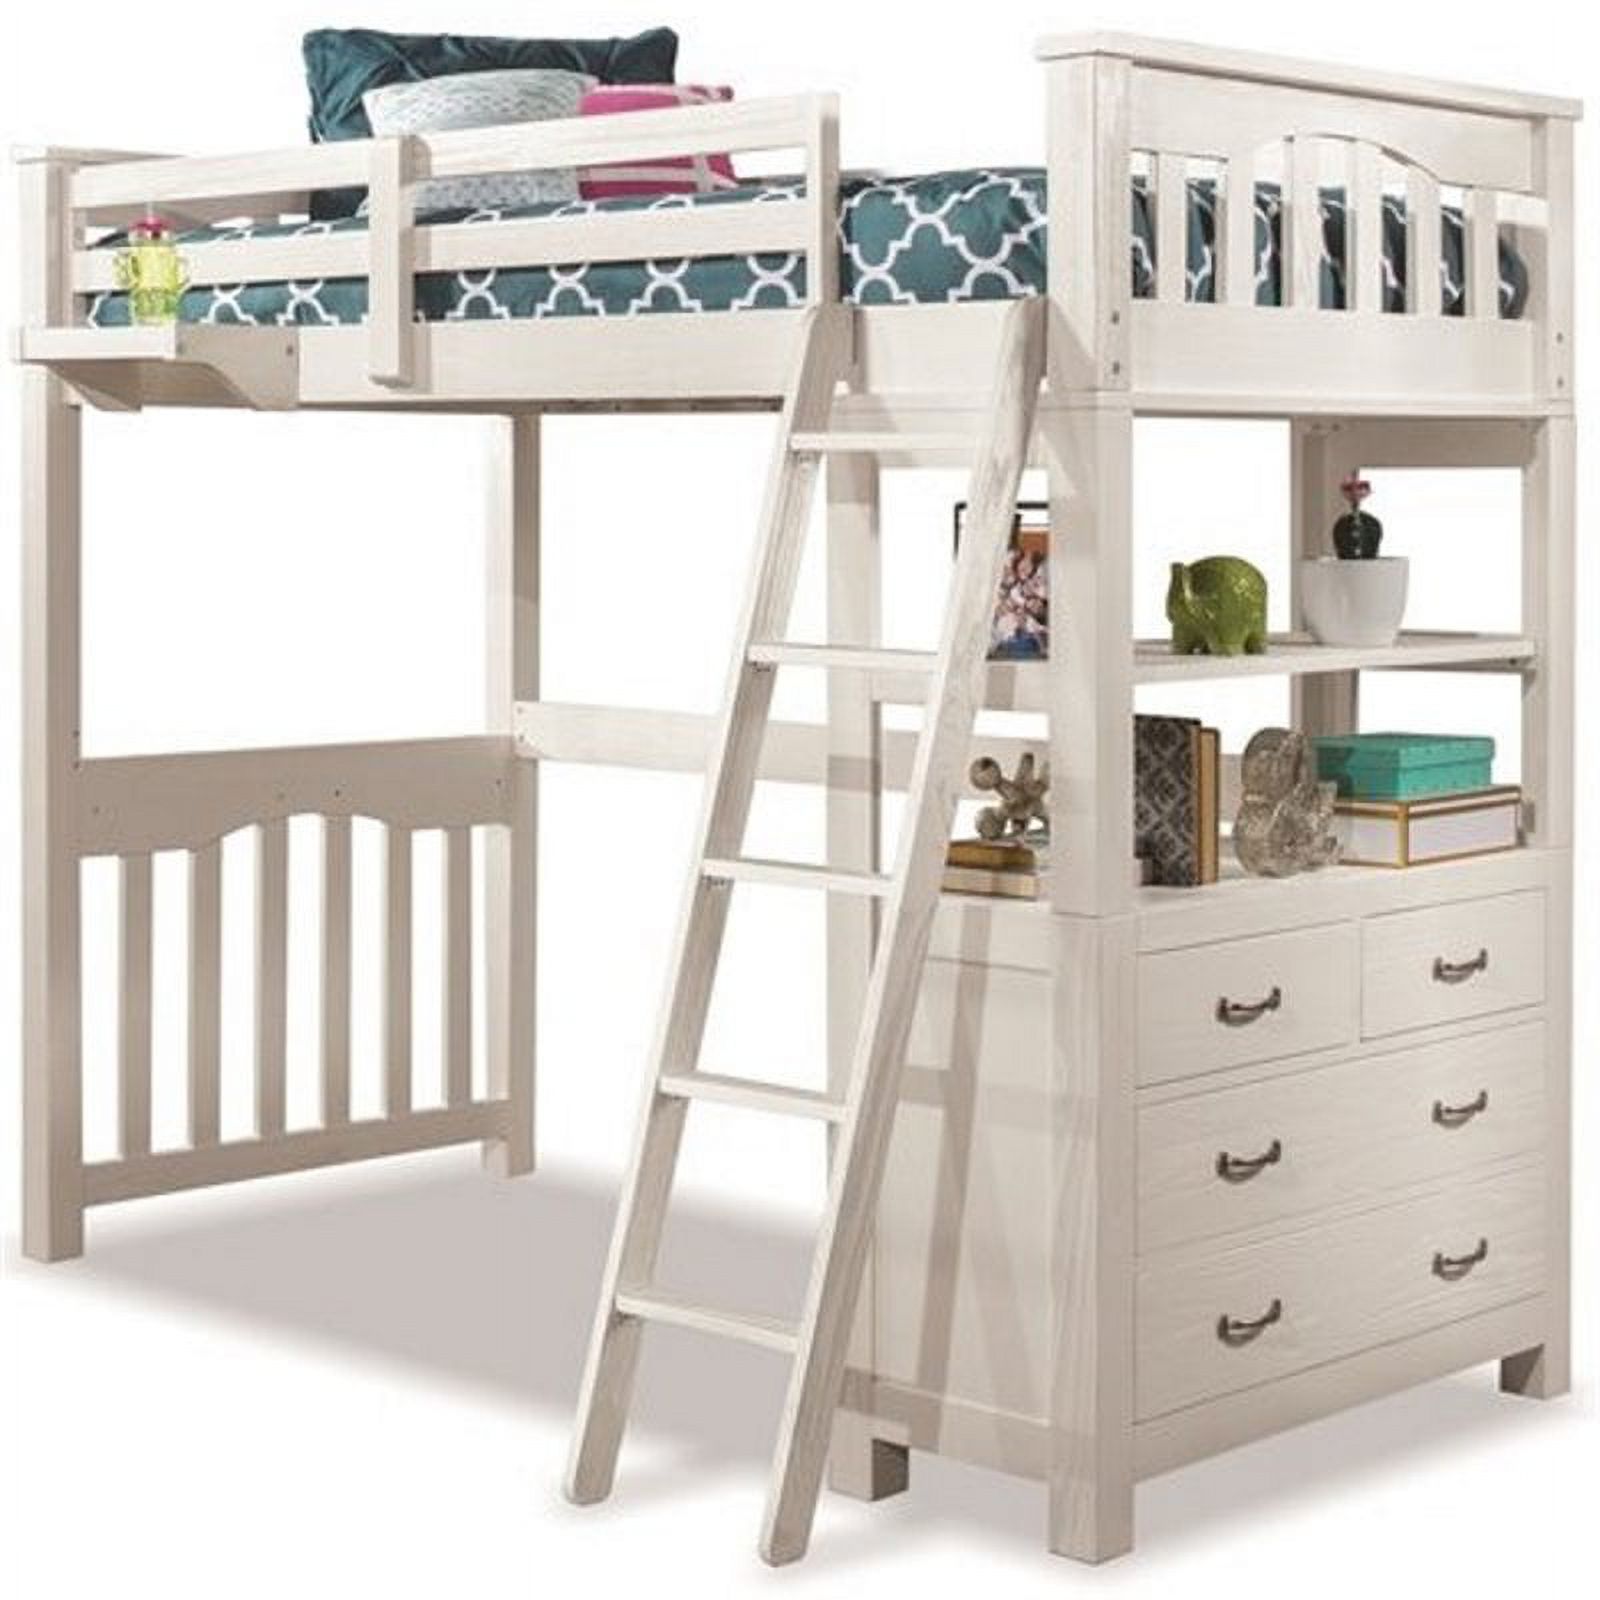 Pemberly Row Twin Wooden Loft Bed with Dresser and Hanging Nightstand in White - image 1 of 8